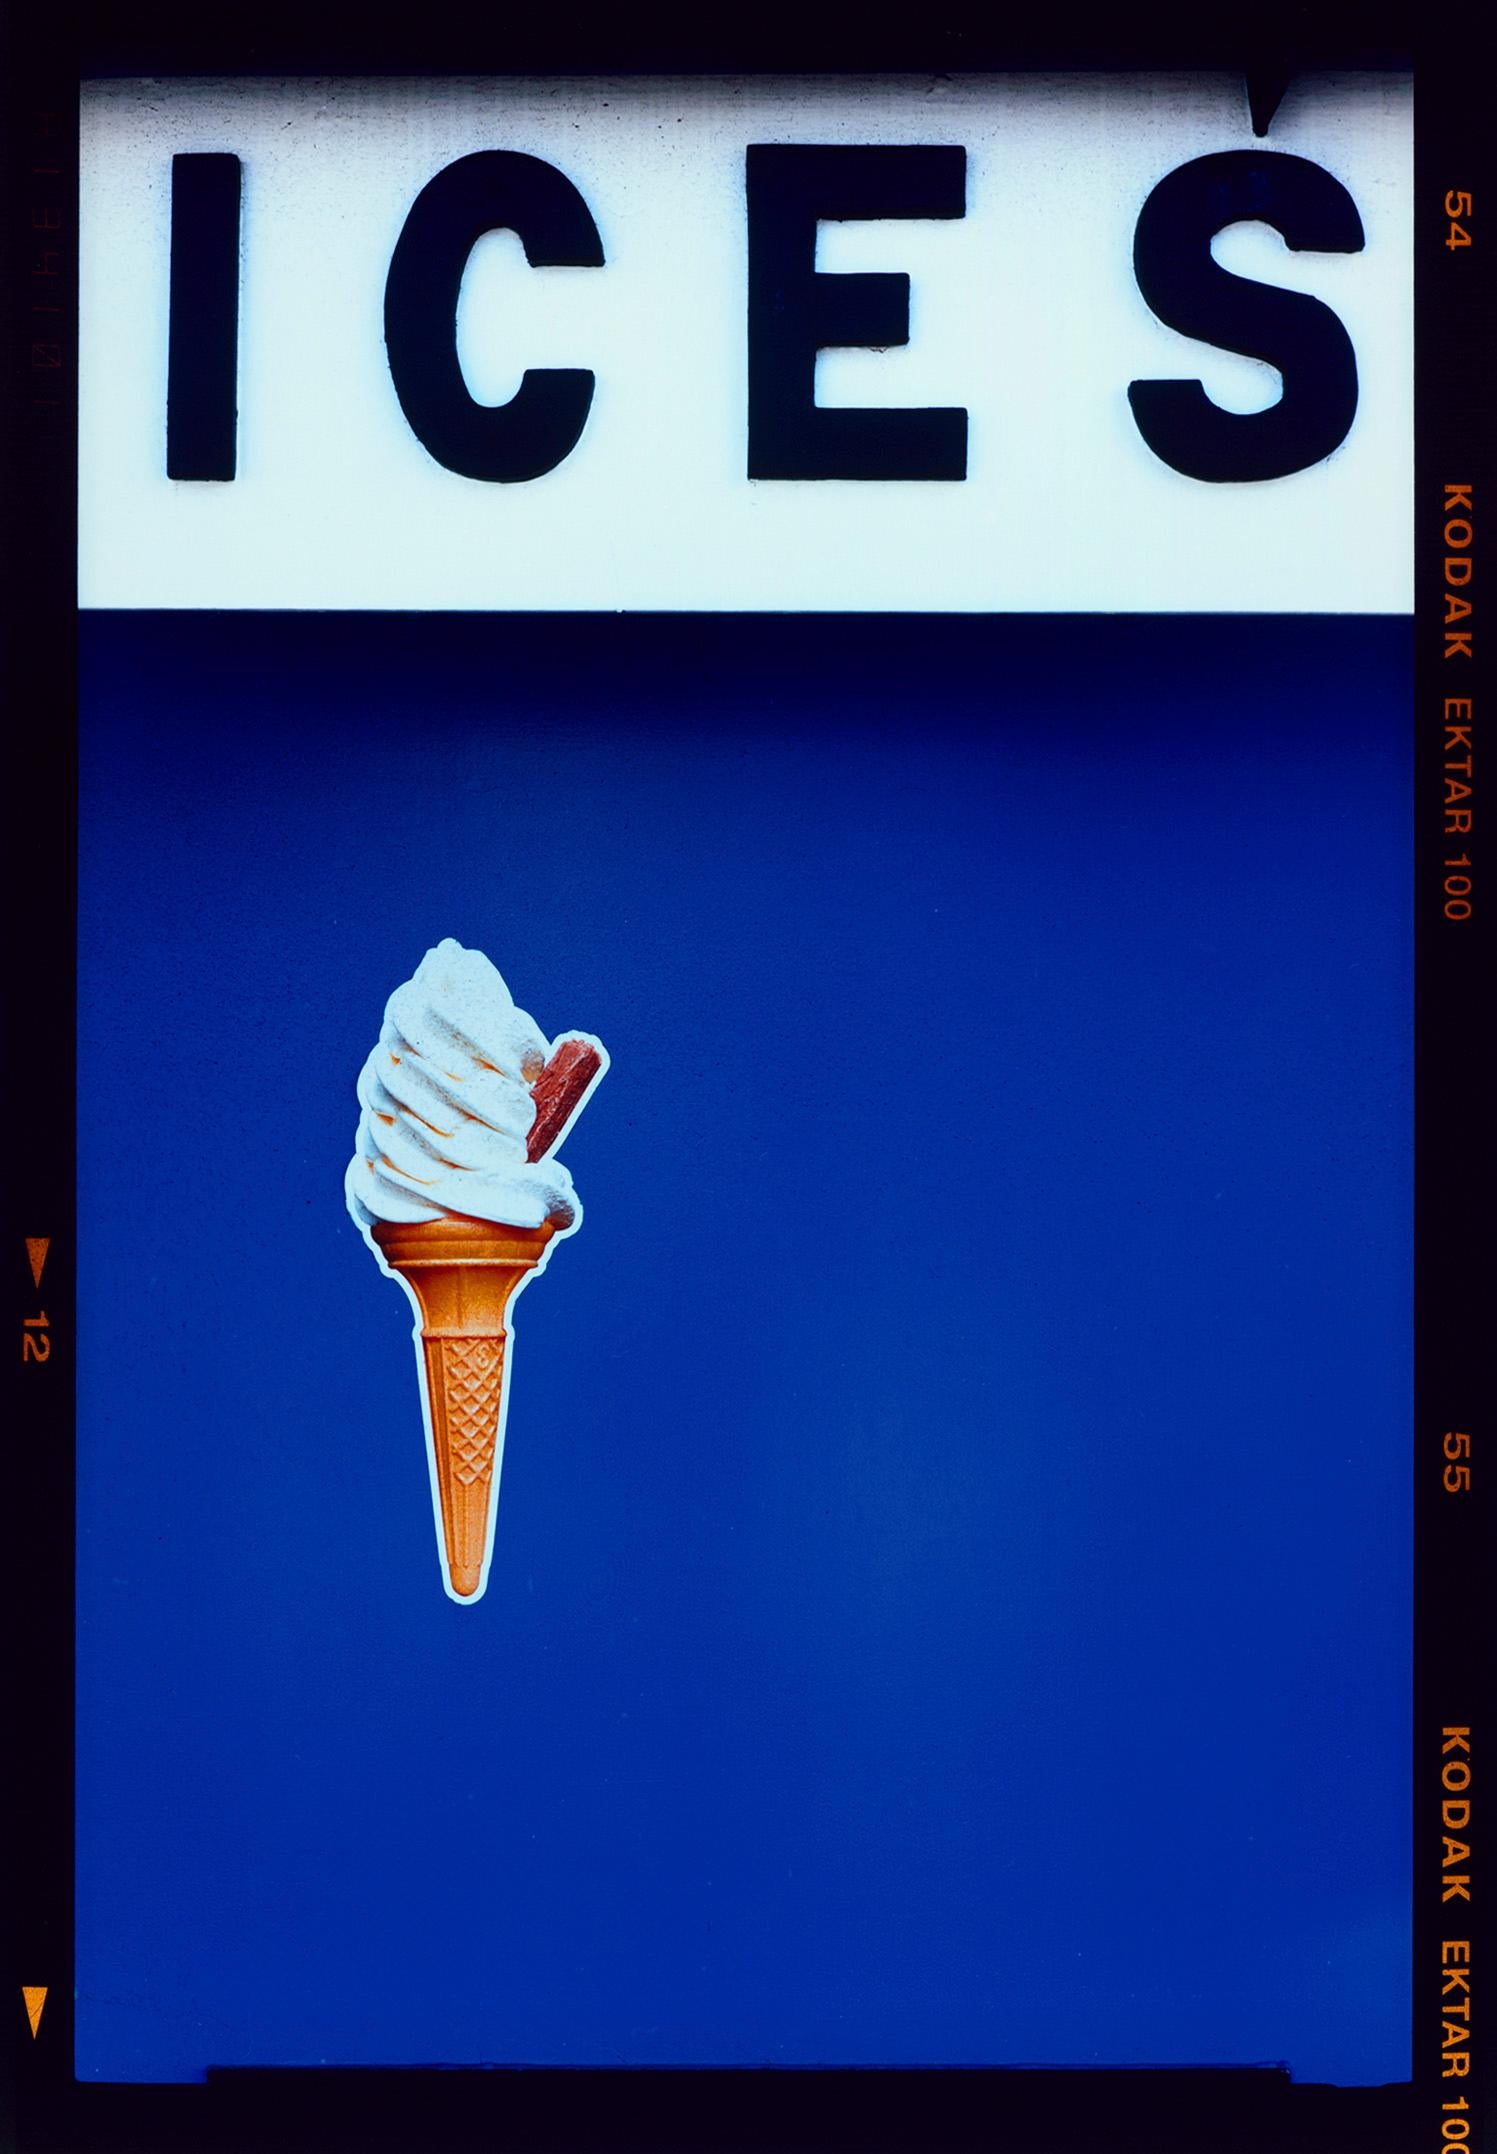 Richard Heeps Color Photograph - Ices, Bexhill-on-Sea - British seaside color photography